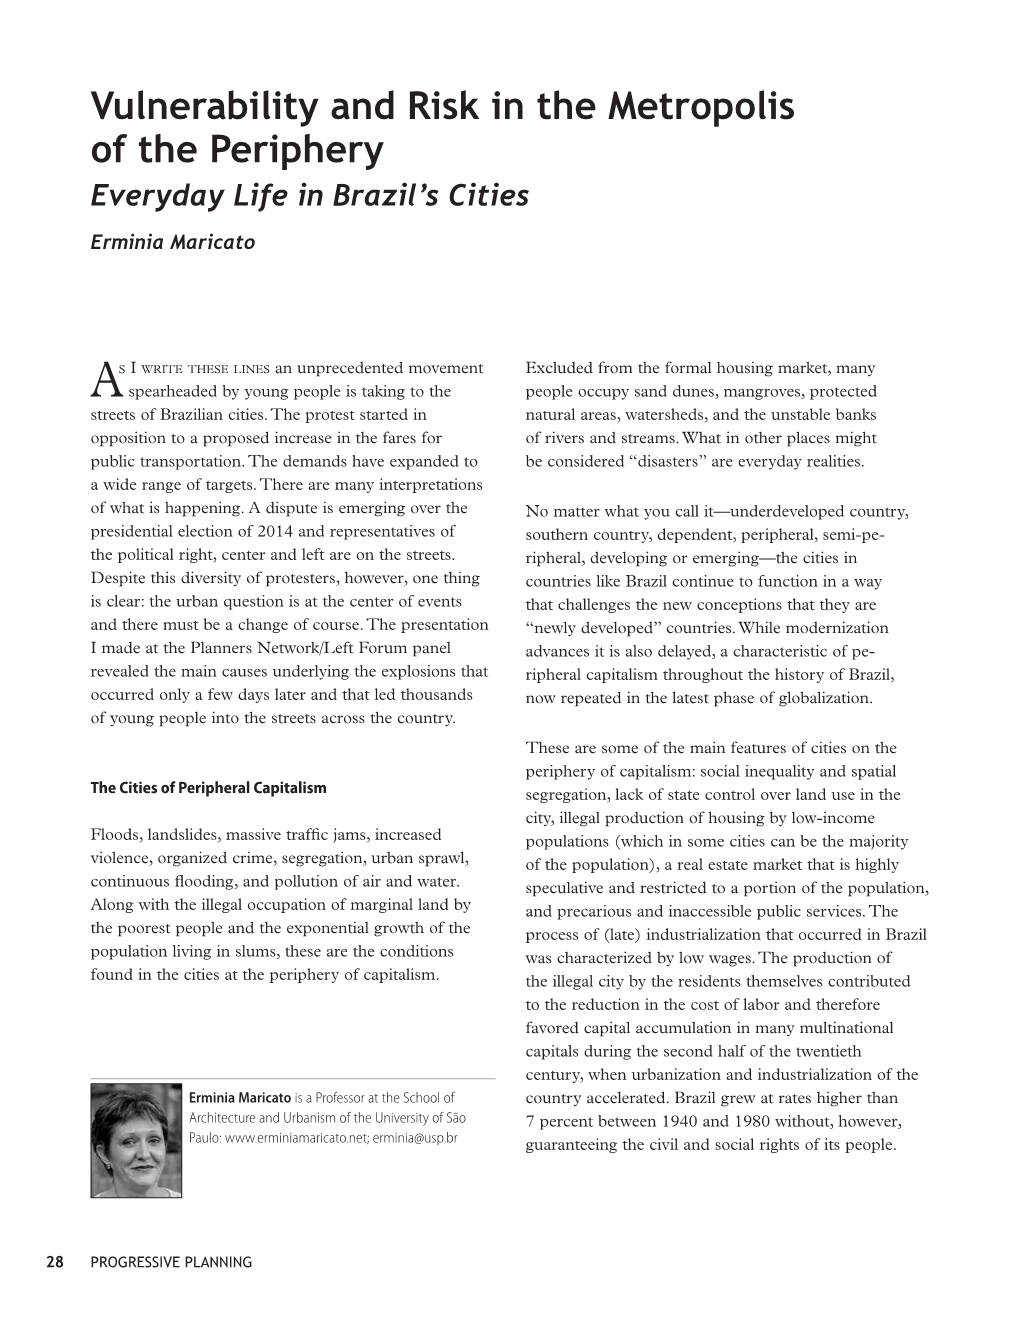 Vulnerability and Risk in the Metropolis of the Periphery Everyday Life in Brazil’S Cities